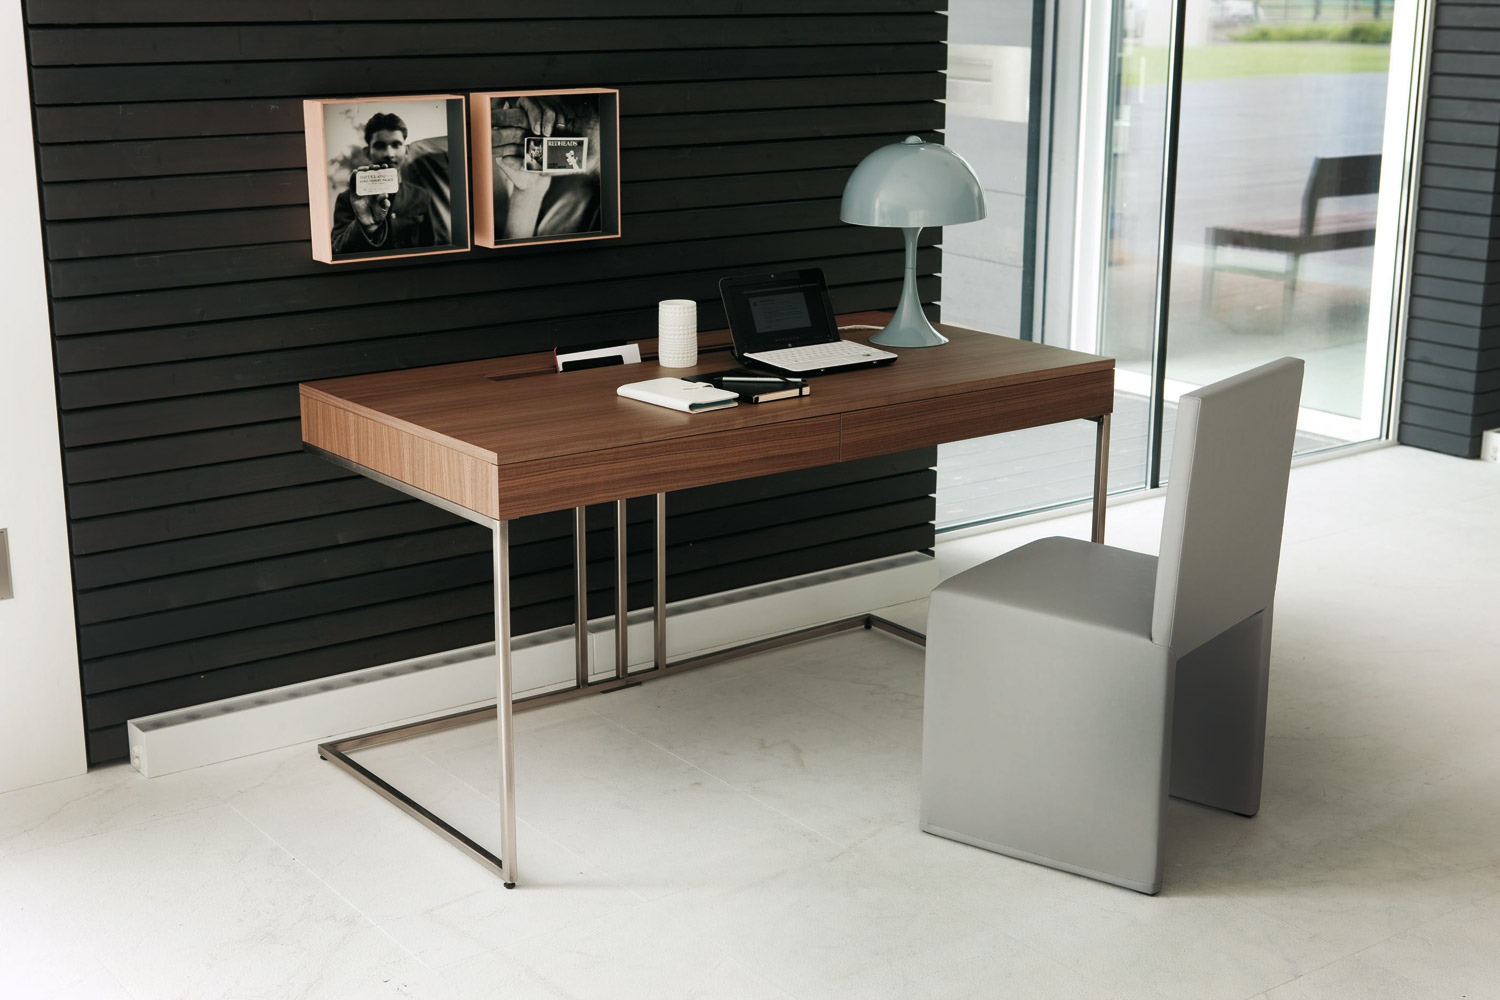 Reading Lights Top Trendy Reading Lights Also Wooden Top Desk Design Feat Modern Office Chair And Black Painted Wall Idea Office  Futuristic Chairs That Will Improve The Interior Designs Of Your Offices 